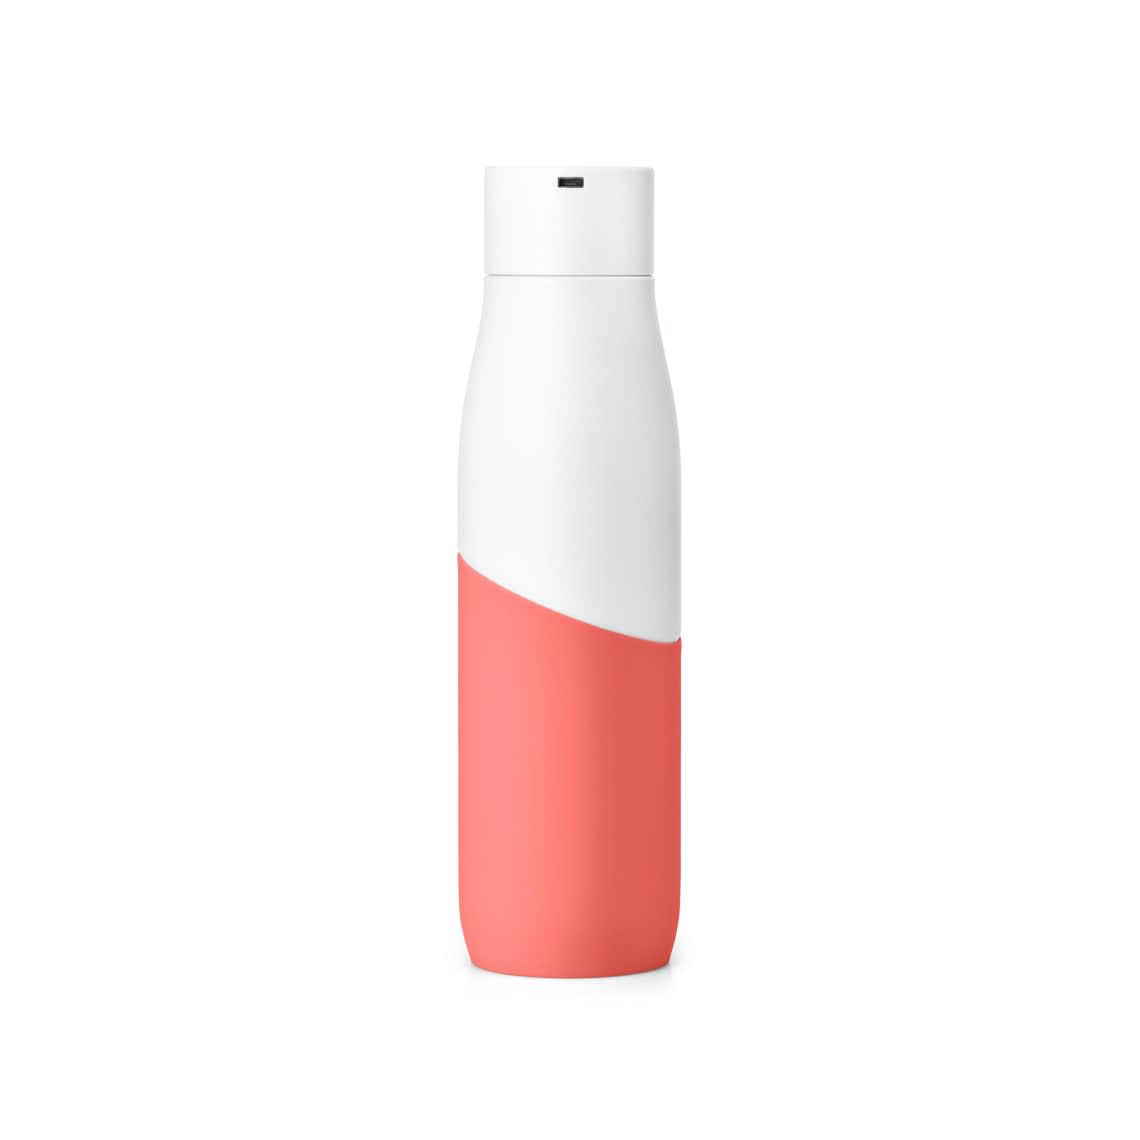 LARQ Bottle Movement PureVis - Lightweight Self-Cleaning and Non-Insulated  Stainless Steel Water Bot…See more LARQ Bottle Movement PureVis 